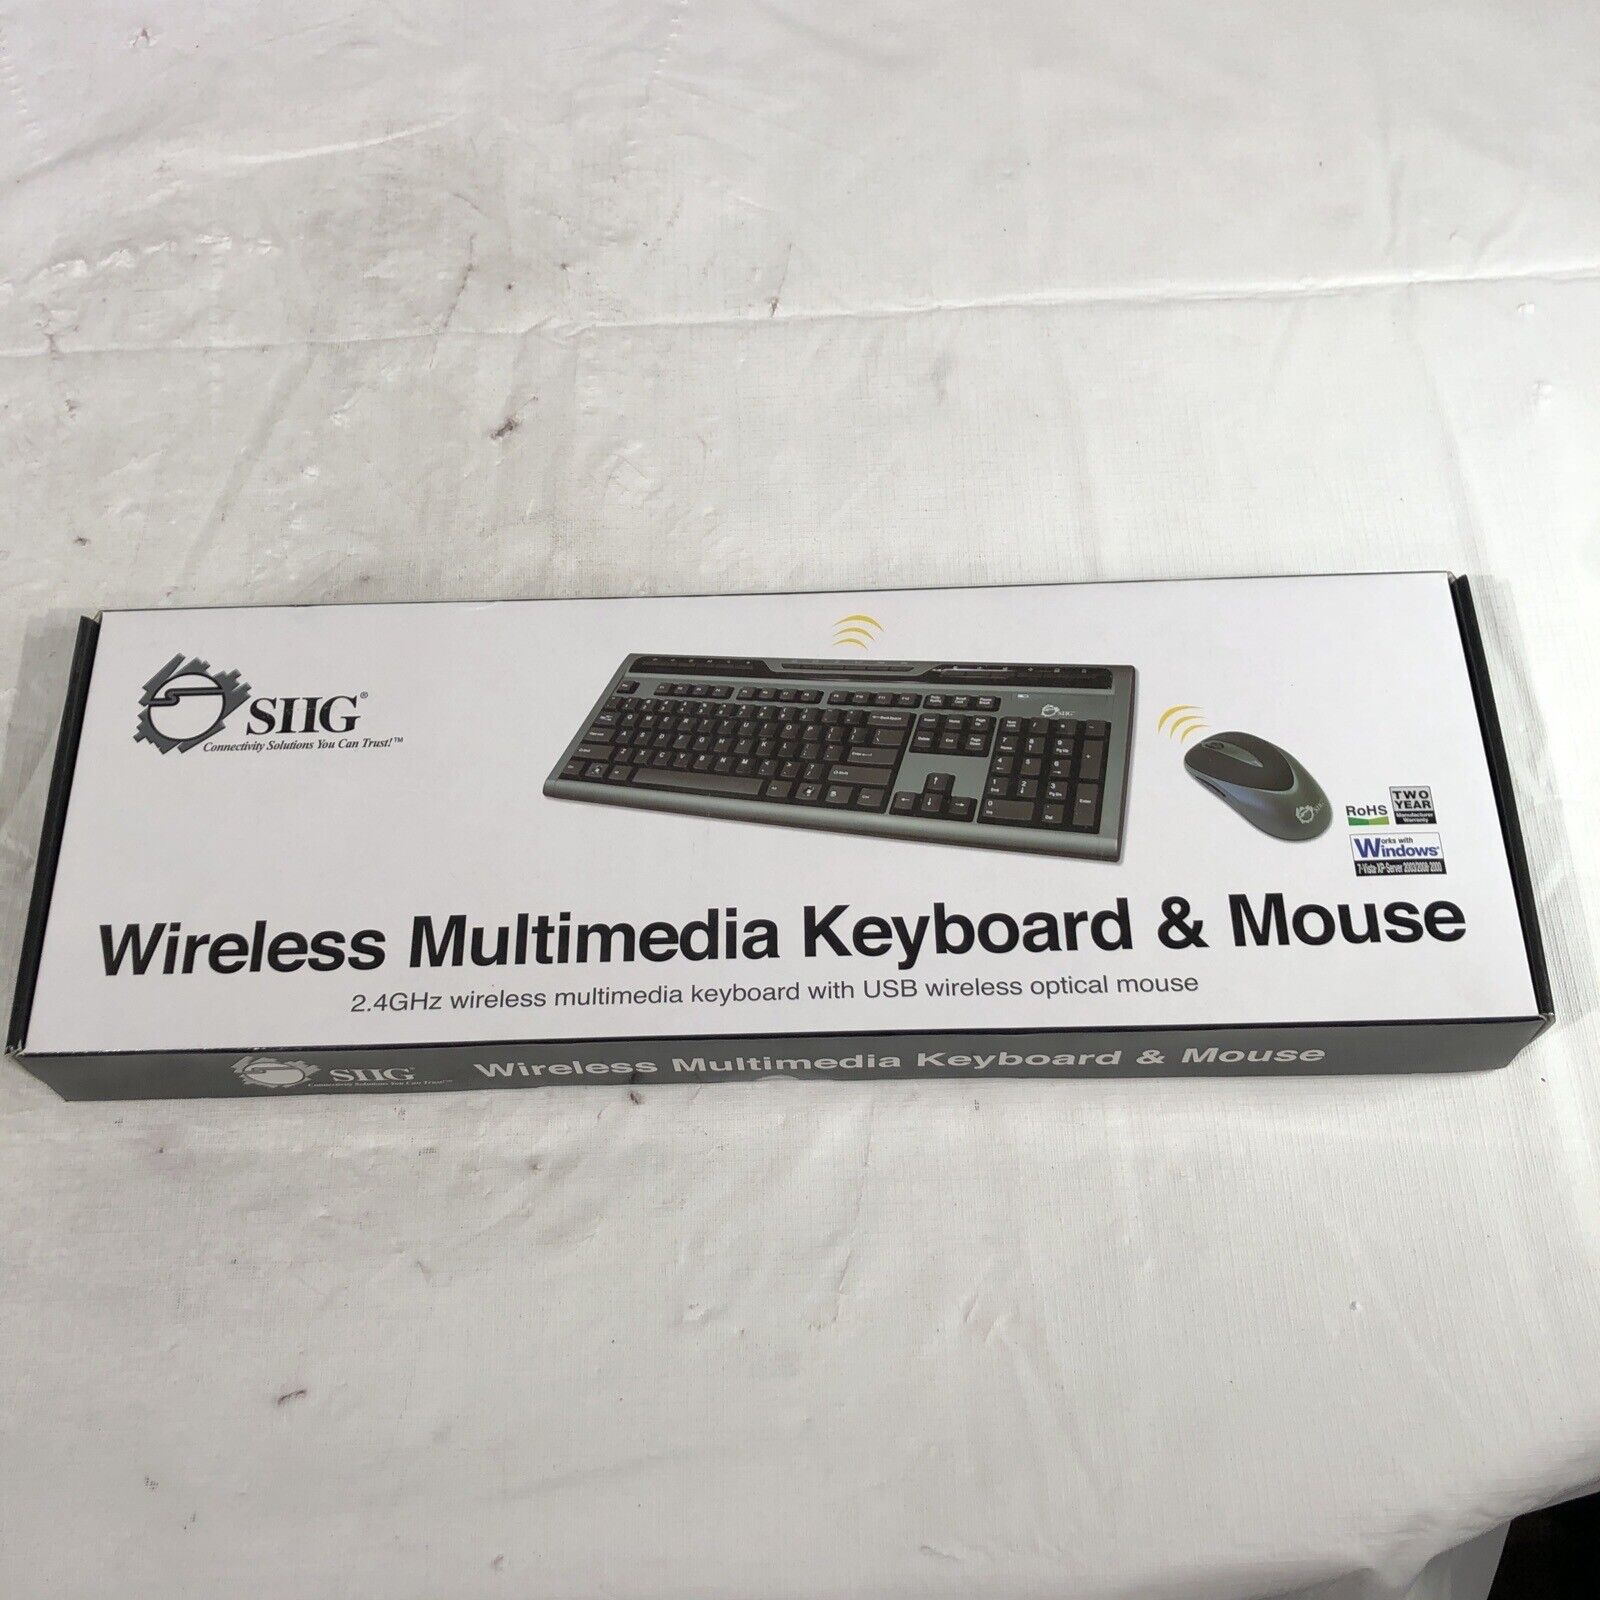 SIIG Brand New Wireless Multimedia Keyboard With Mouse And Connector-NIB